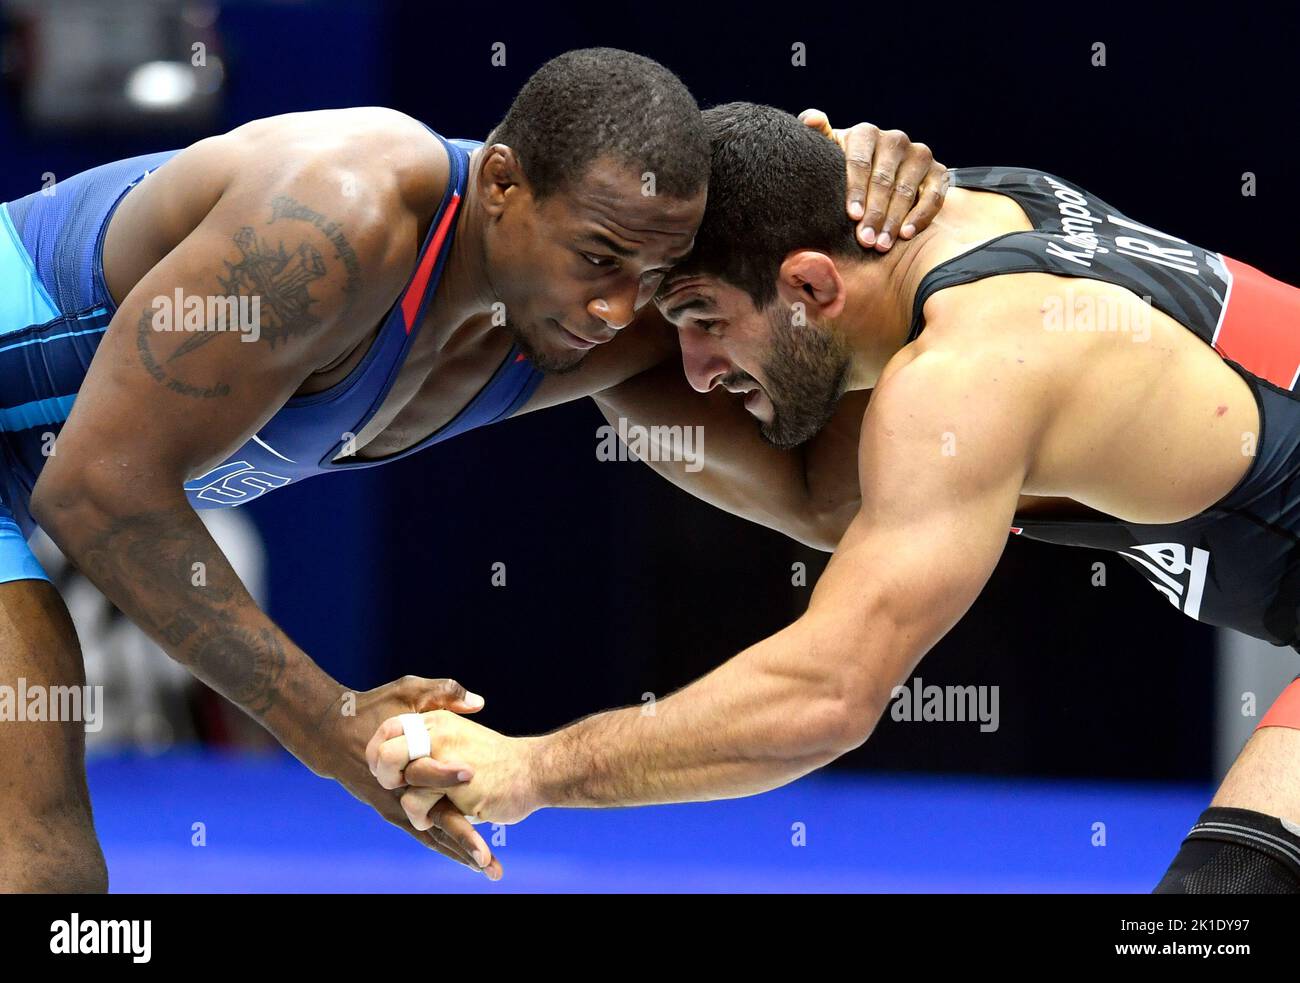 Belgrade. 17th Sep, 2022. Iran's Kamran Ghorban Ghasempour (R) fights against J'Den Michael Tbory Cox of the United States during the men's 92kg category freestyle final at the Wrestling World Championships in Belgrade, Serbia on Sept. 17, 2022. Credit: Predrag Milosavljevic/Xinhua/Alamy Live News Stock Photo